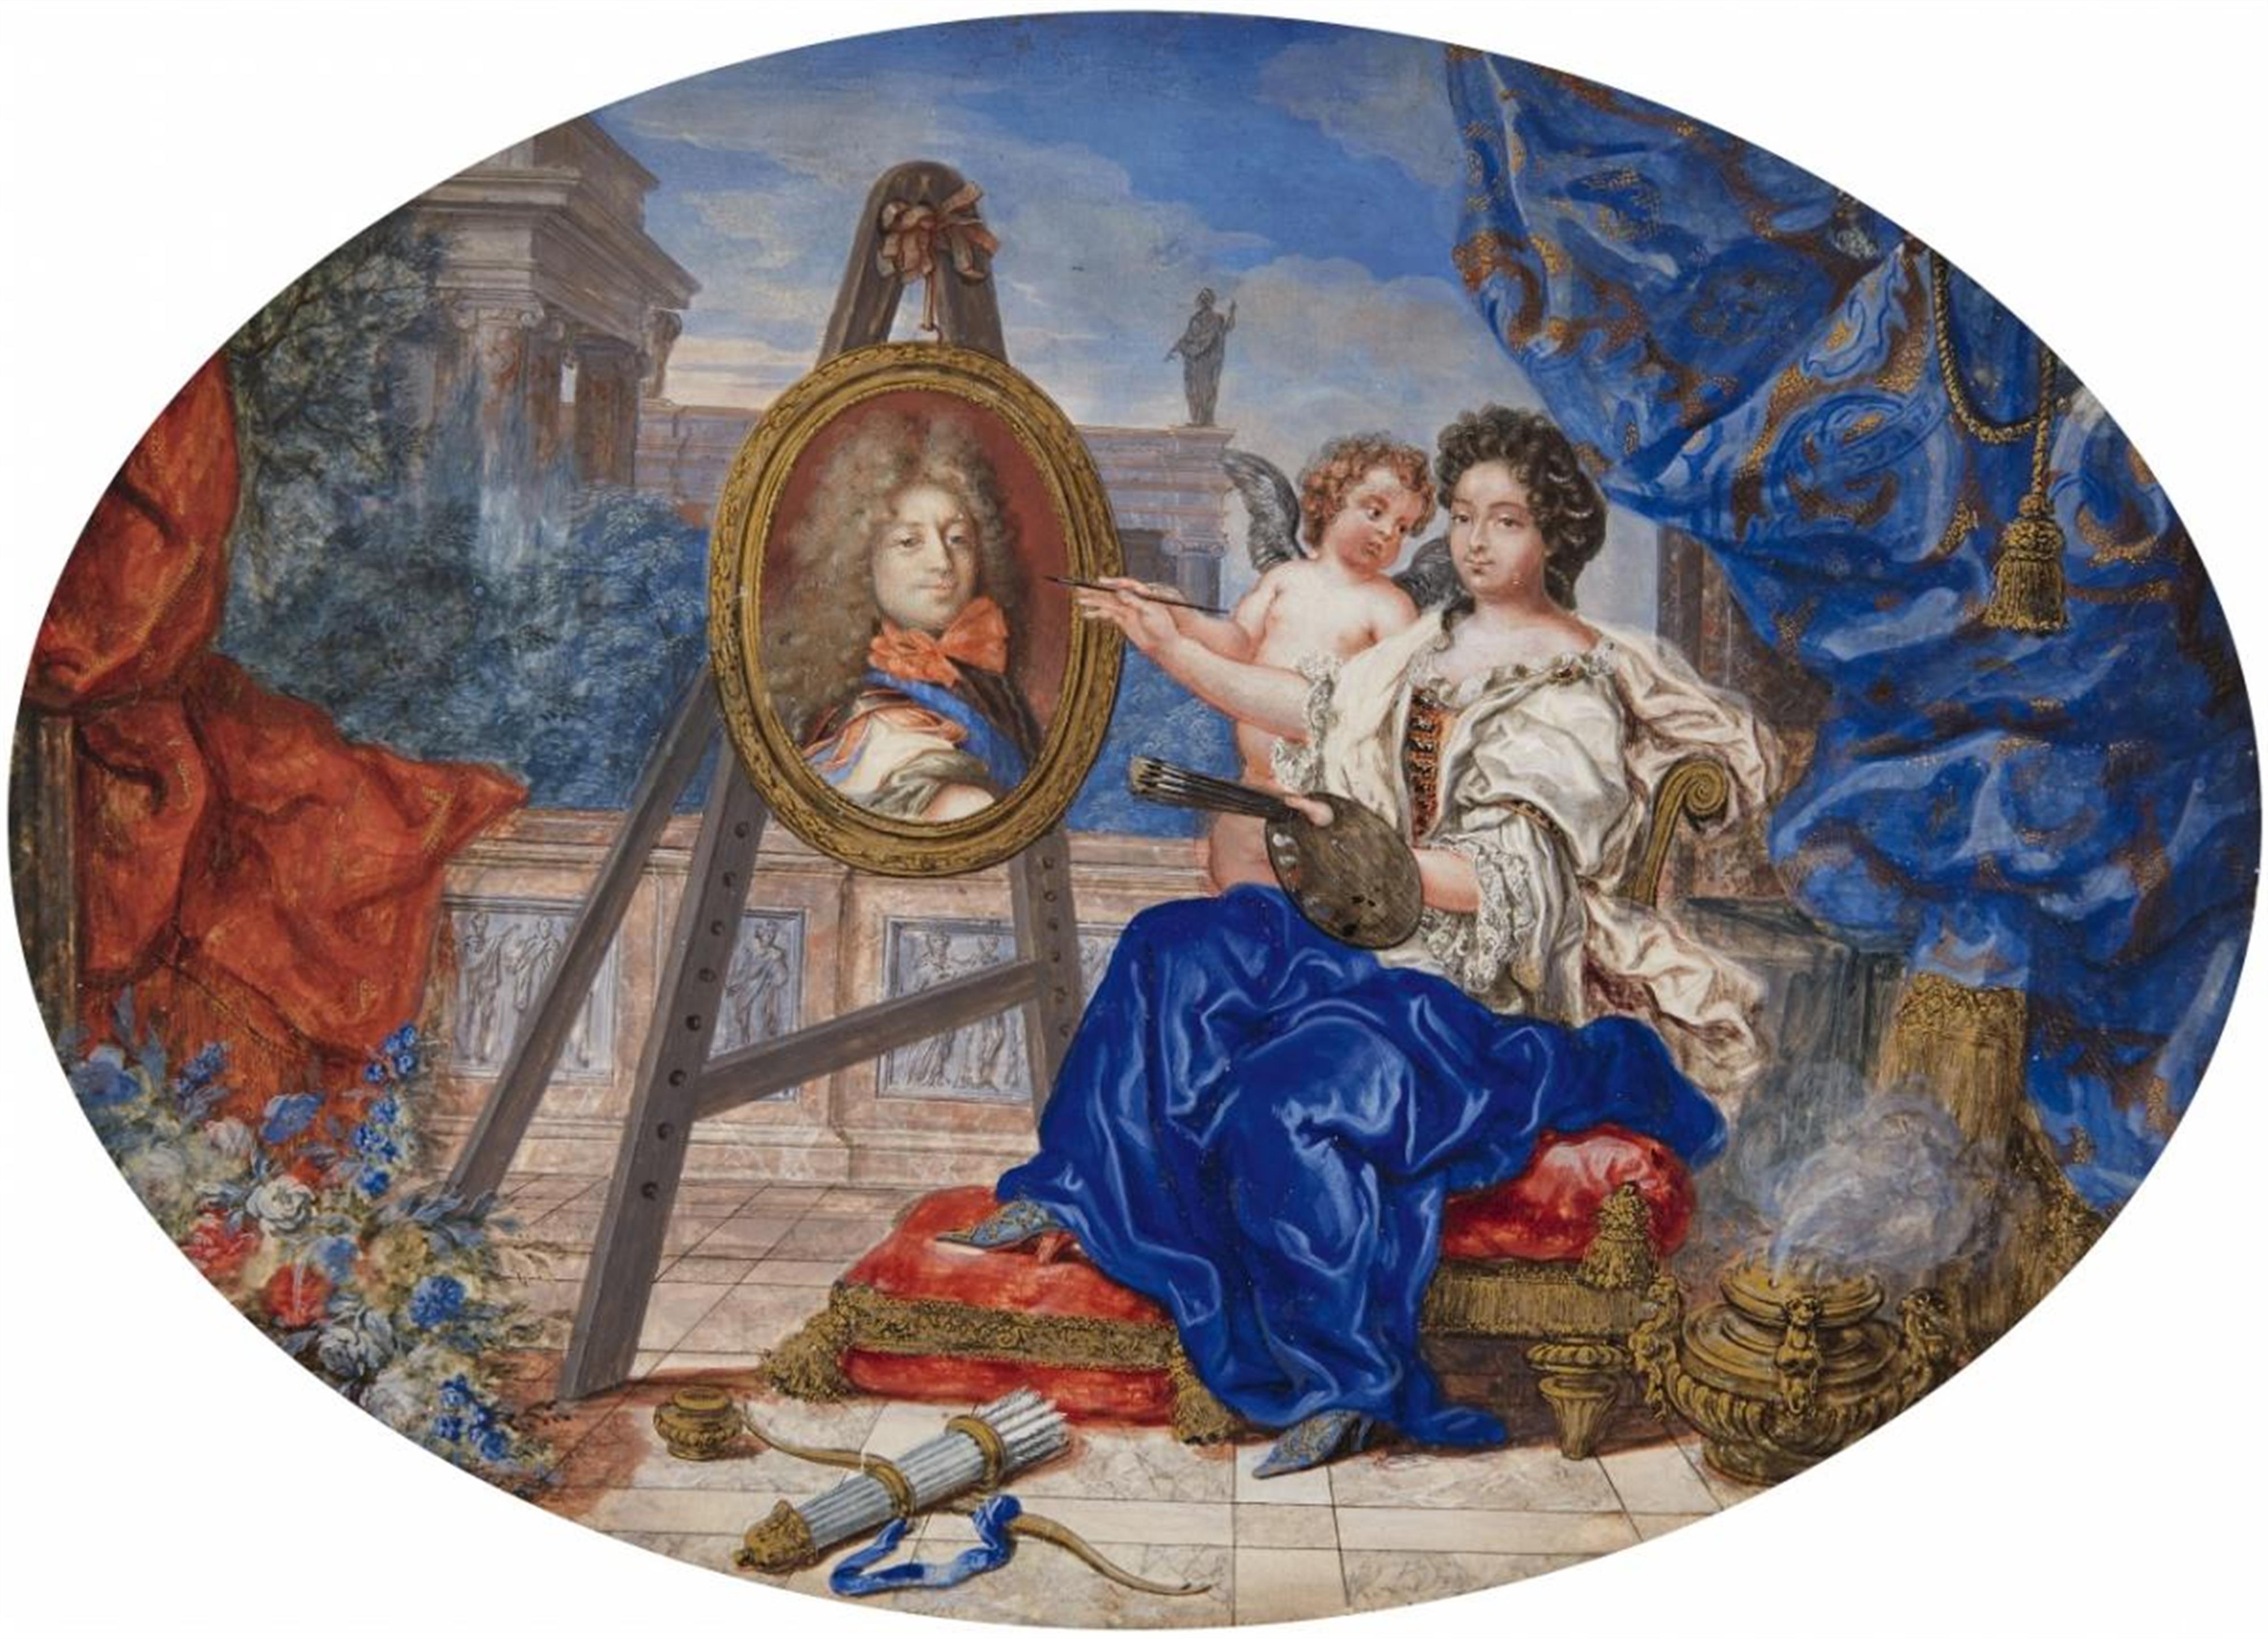 Joseph Werner - Allegory of the Marriage of the Grand Dauphin Louis of France and Princess Maria Anna of Bavaria - image-1